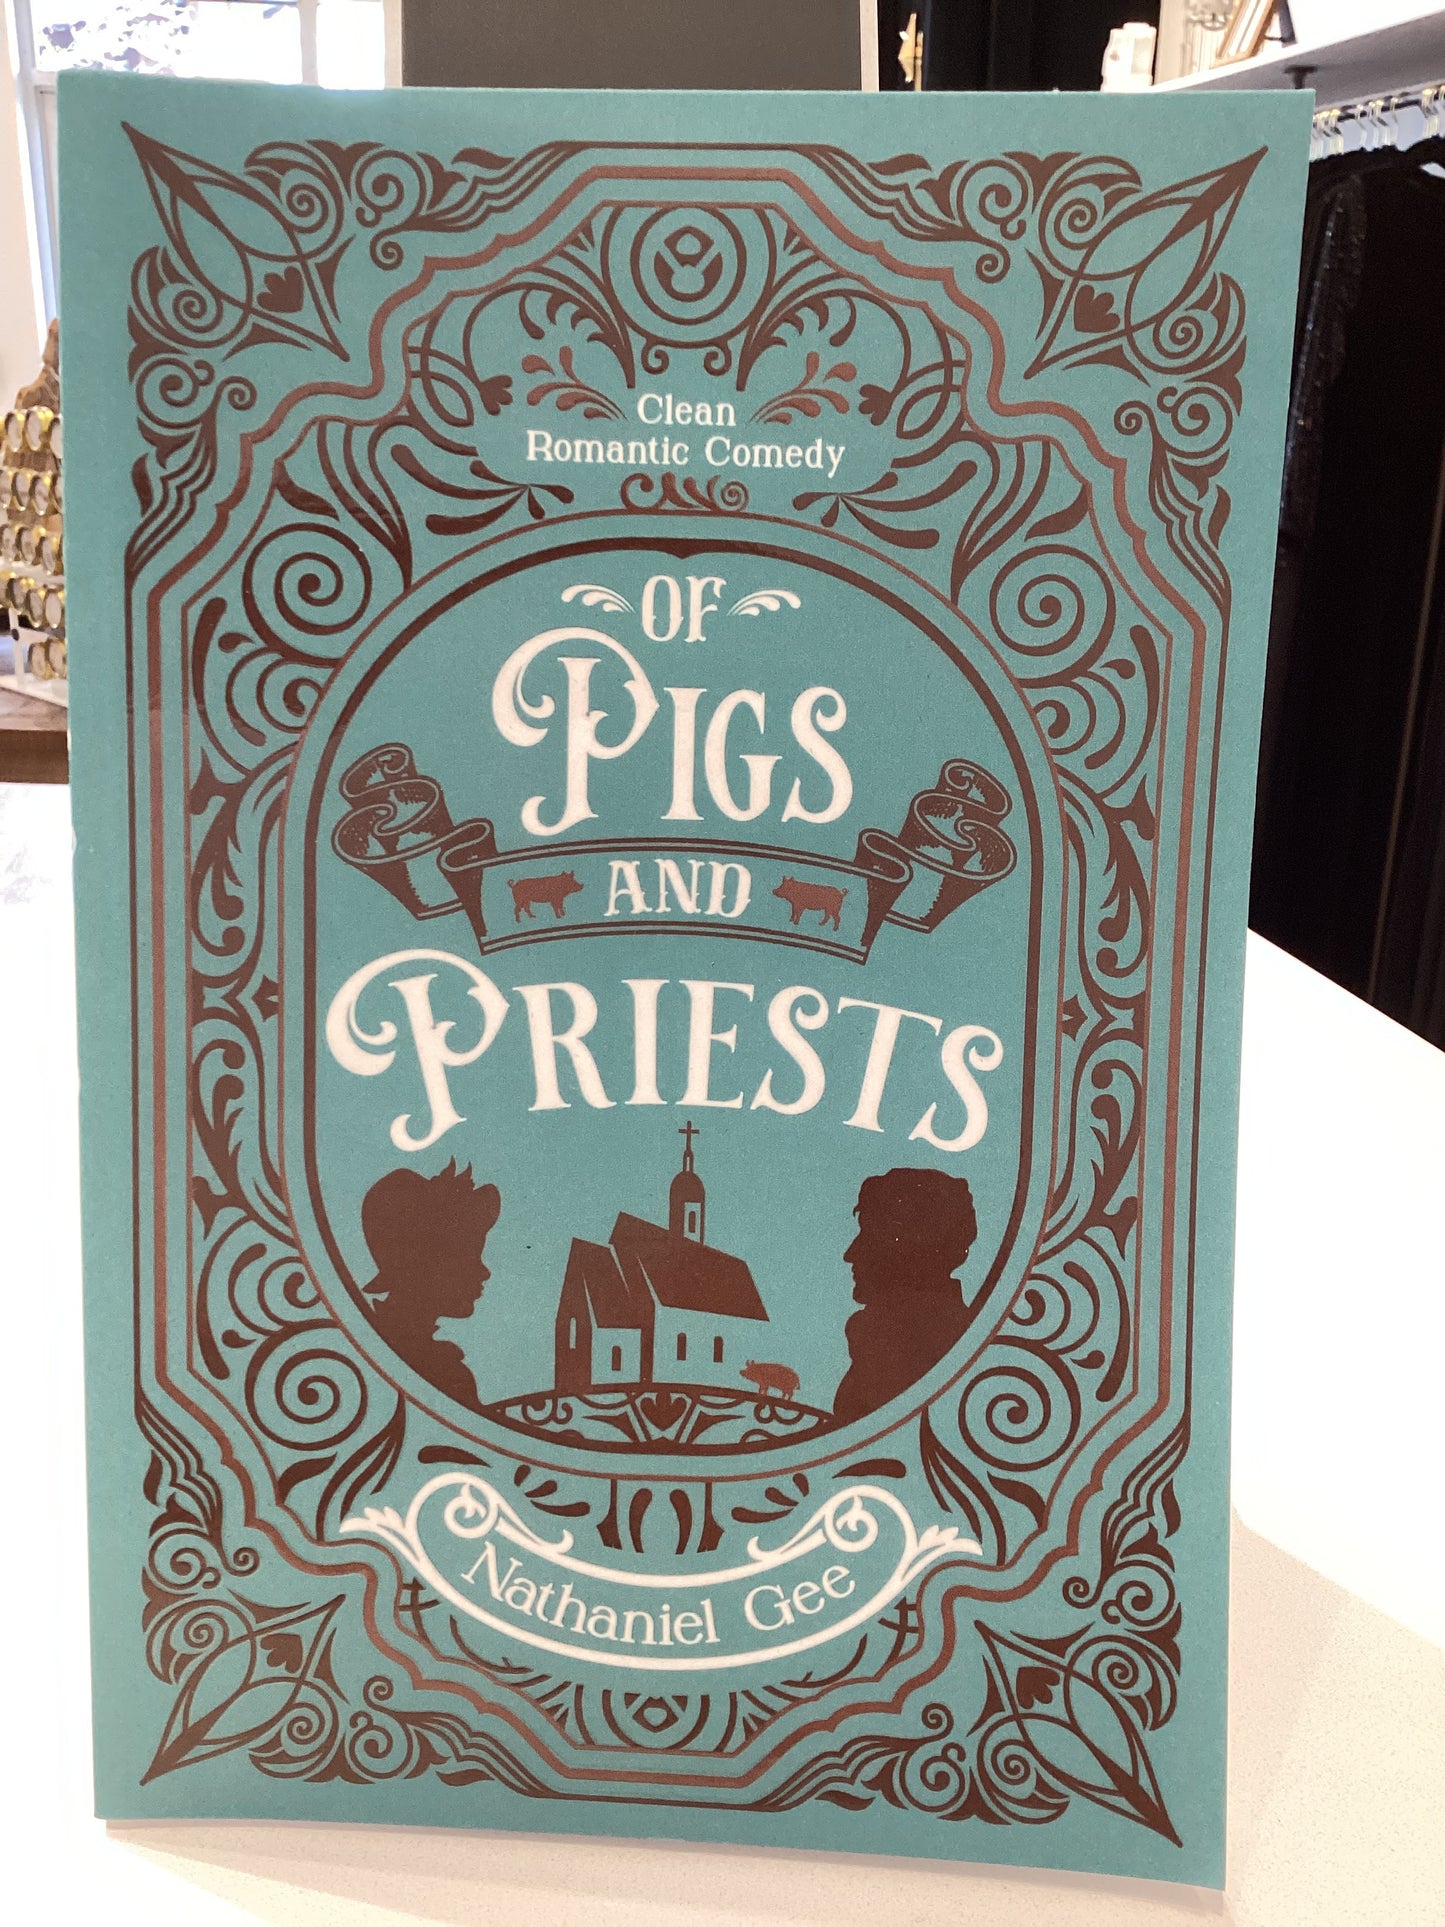 “Of Pigs and Priests” book by Nathaniel Gee